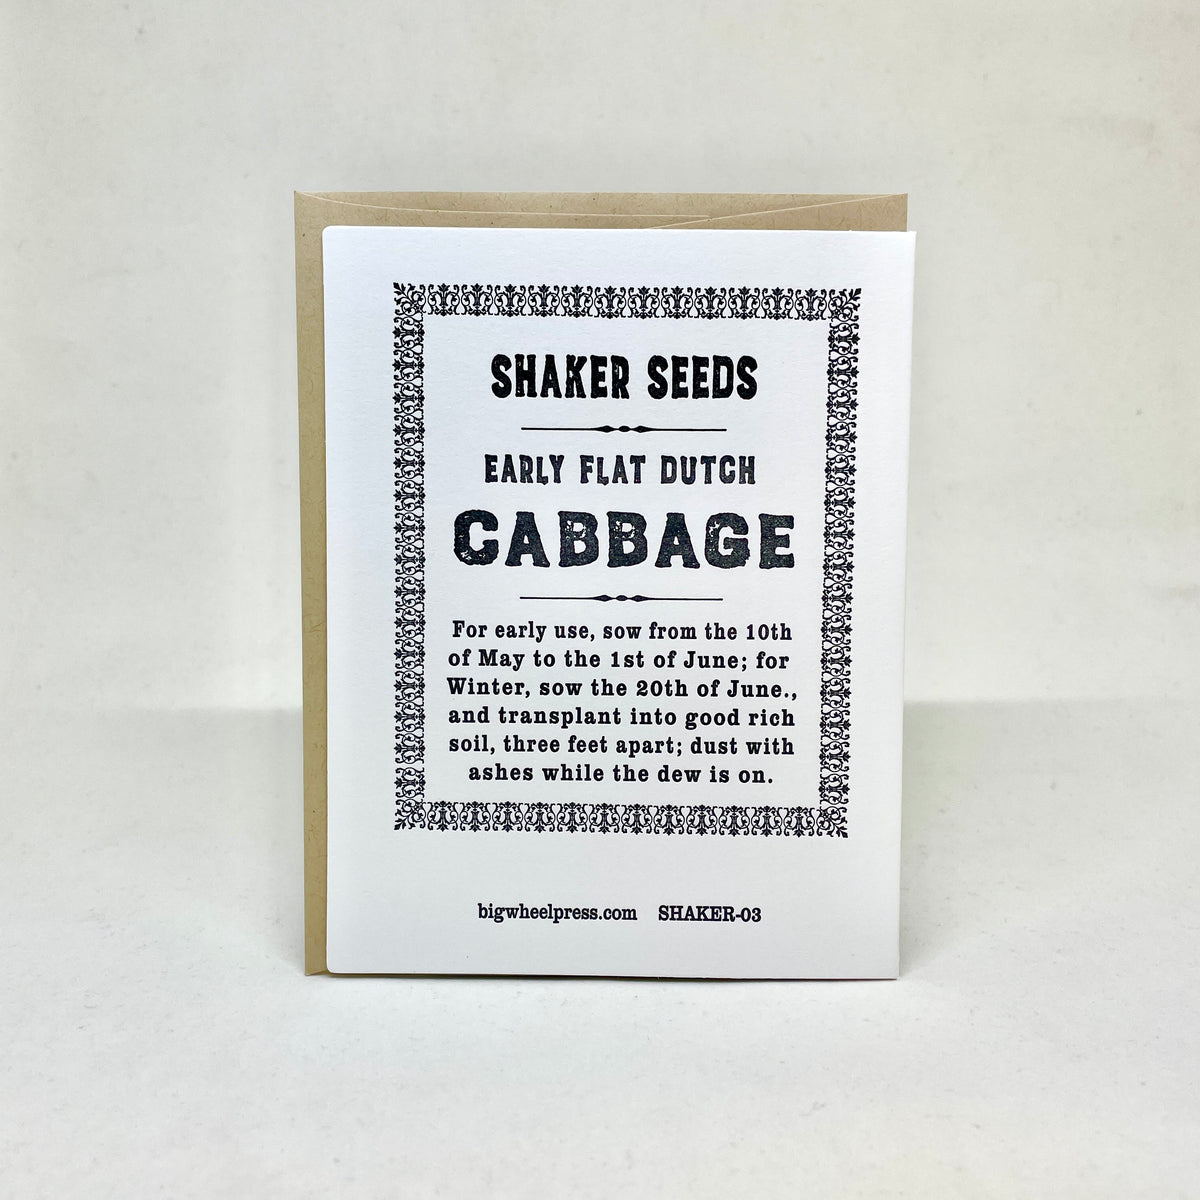 Early Flat Dutch Cabbage - Shaker Seeds